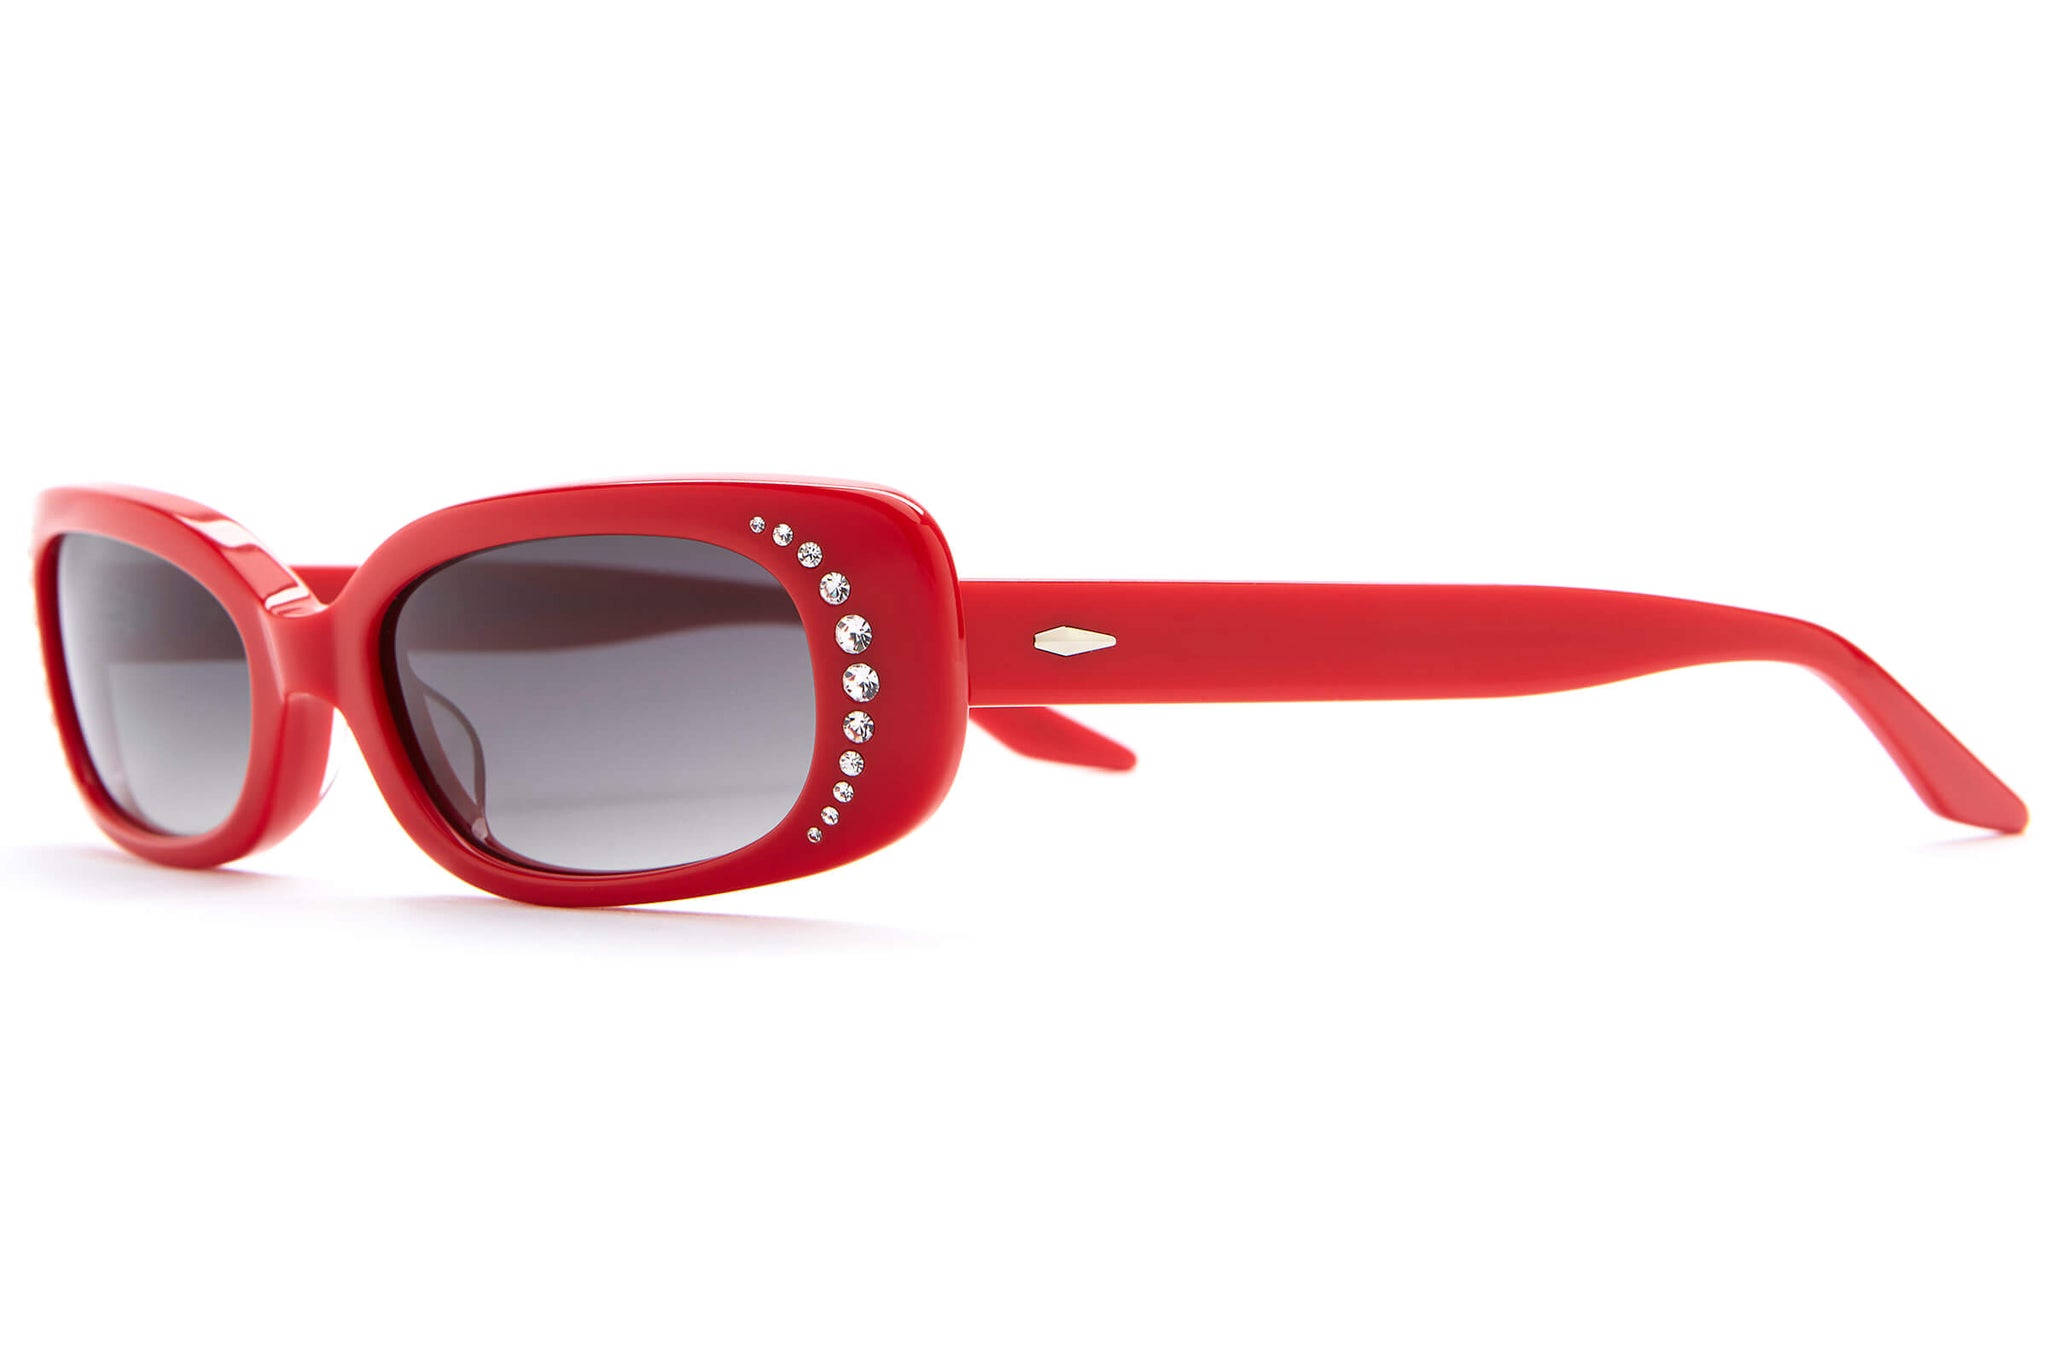 Elegant Designer Rhinestone Sunglasses For Women With Rivets And Circular  Lens Wholesale Large Frame, Top Quality, Includes Case From Wandou12,  $56.12 | DHgate.Com